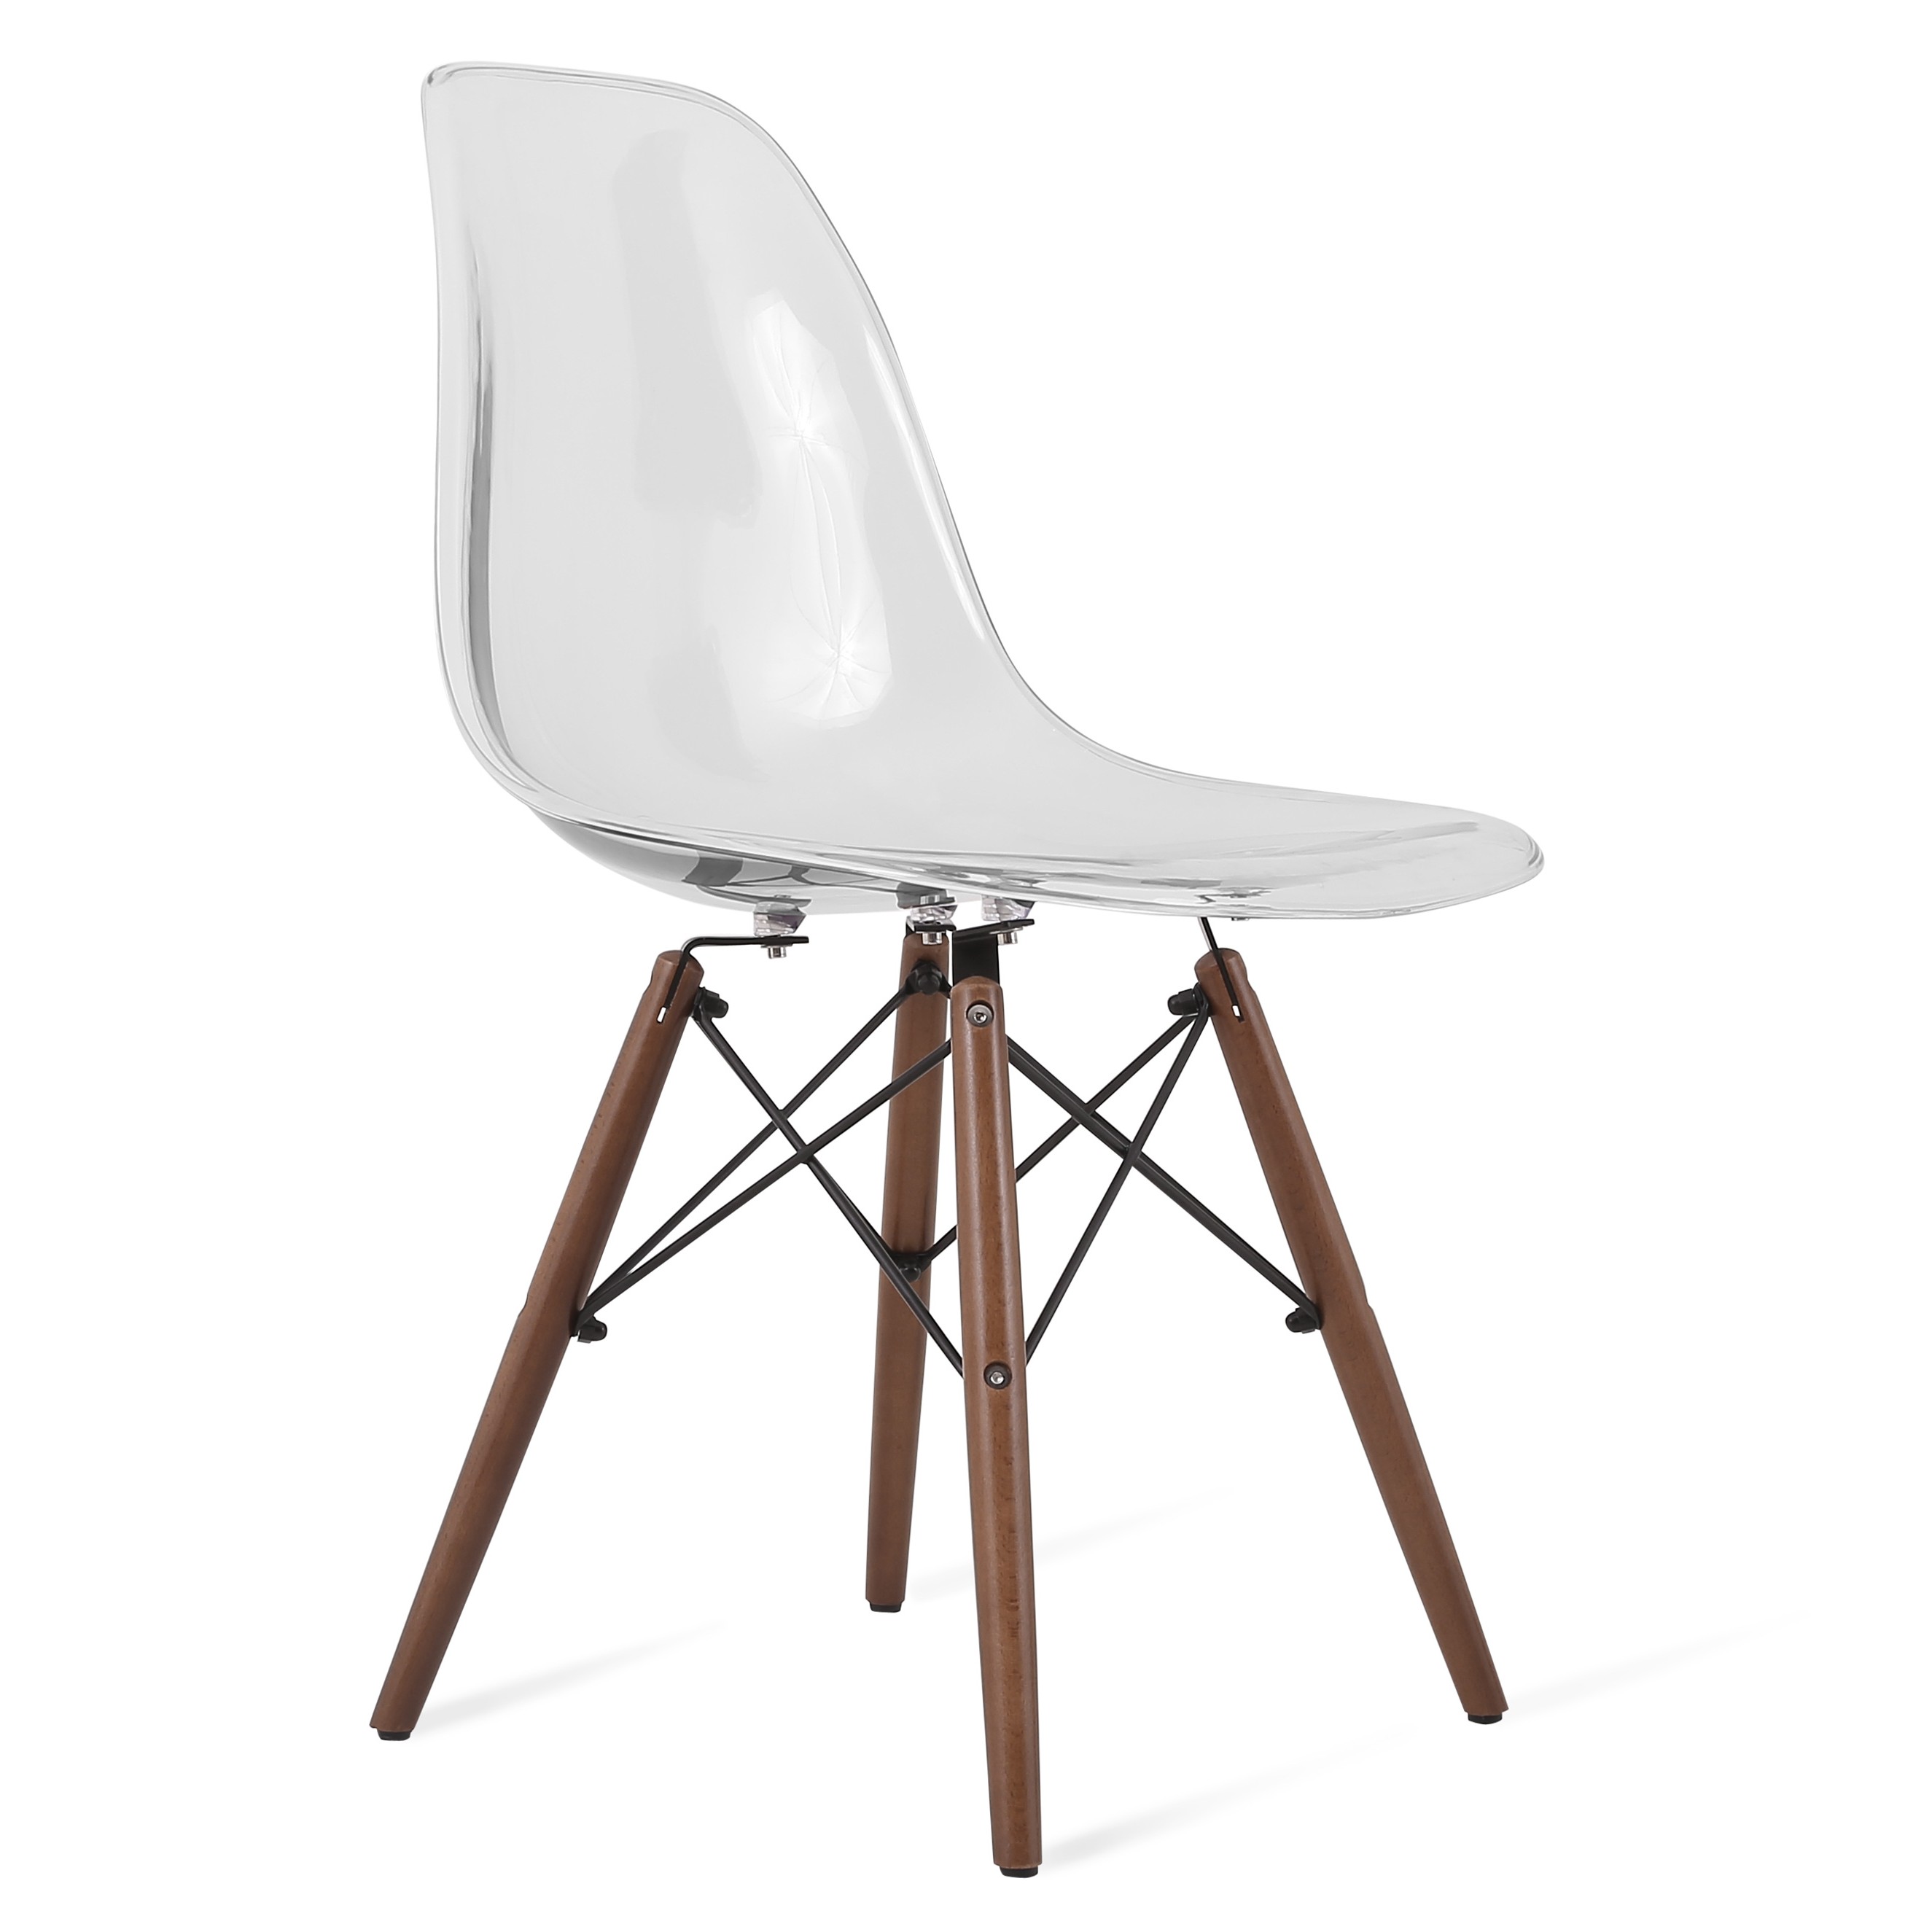 Eames Style DSW Clear Acrylic Plastic Dining Shell Chair ...
